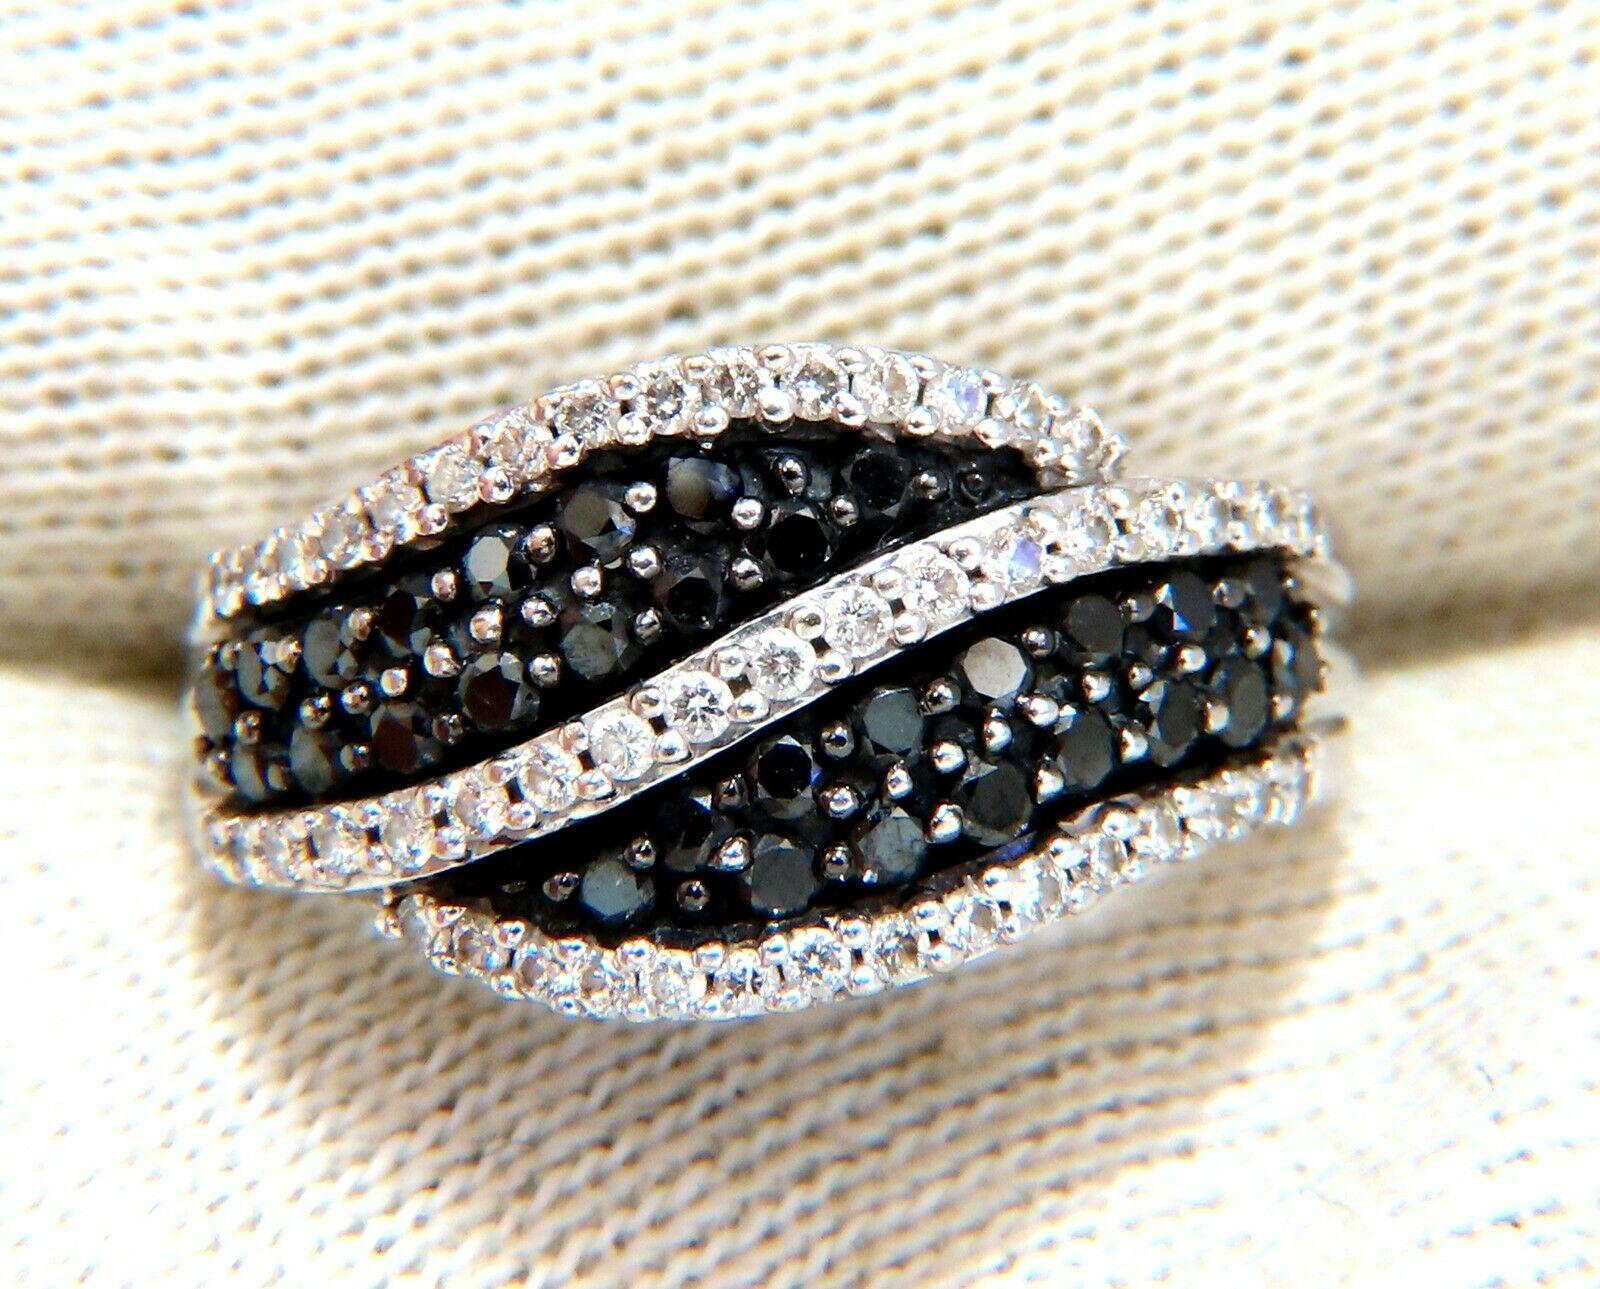 Black Diamonds Band

1.00ct. Natural Black Diamonds &

.40ct White Diamonds

 Round cut brilliant diamonds

Durable Built.

Si-1 clarity H color.

14kt white gold.

4.9 Grams

Overall ring: 10.8mm wide

Depth: 3.6mm

Current ring size: 6.75

May